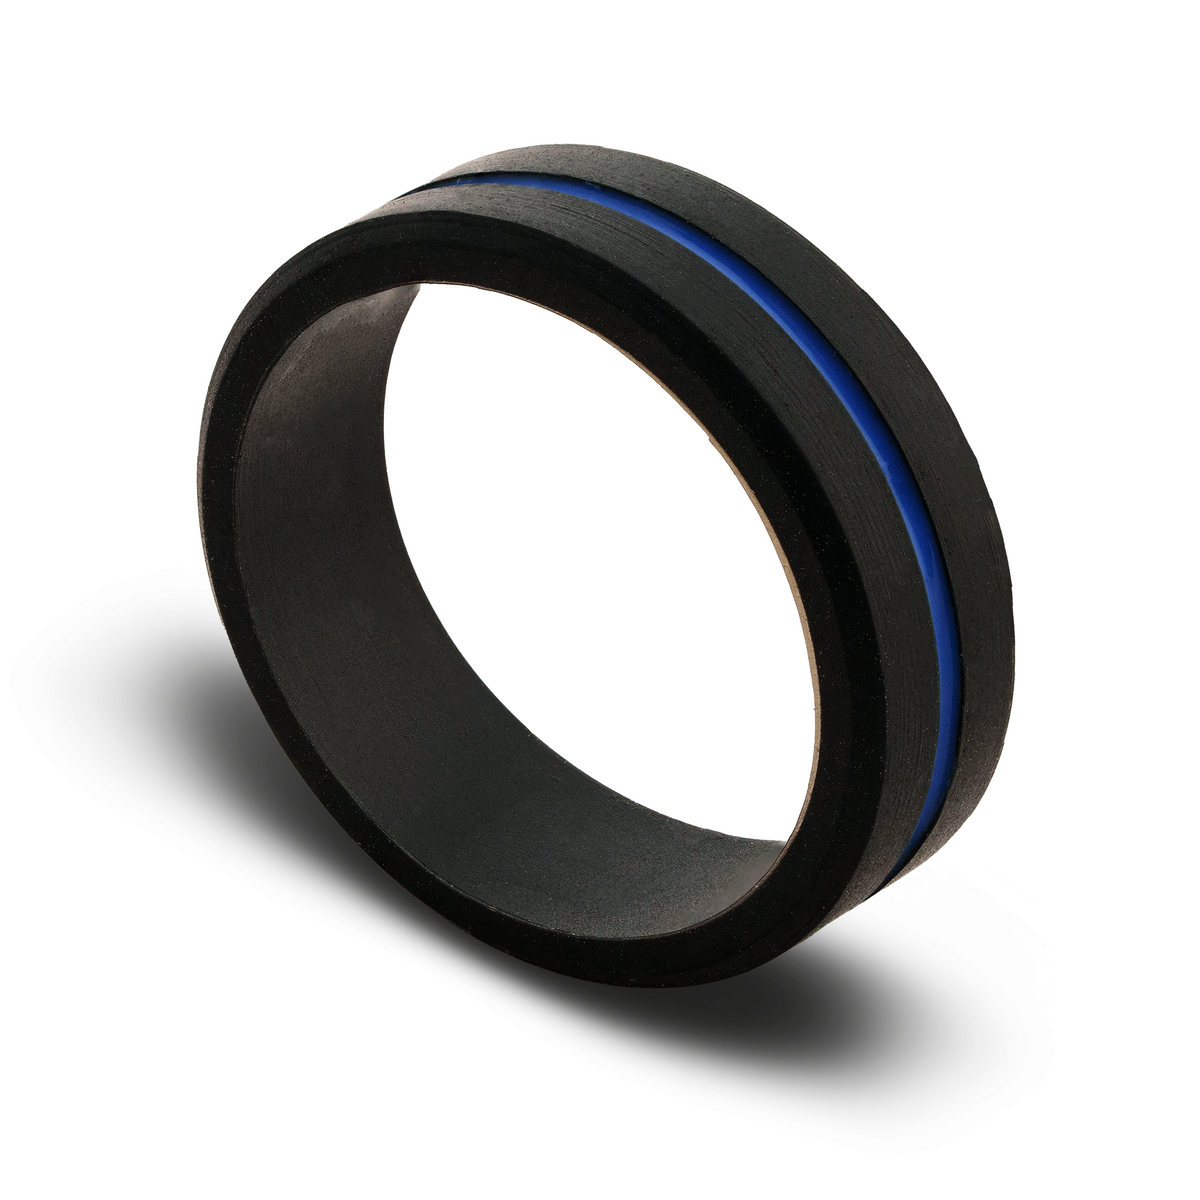 Can You Wear Silicone Rings While Swimming?